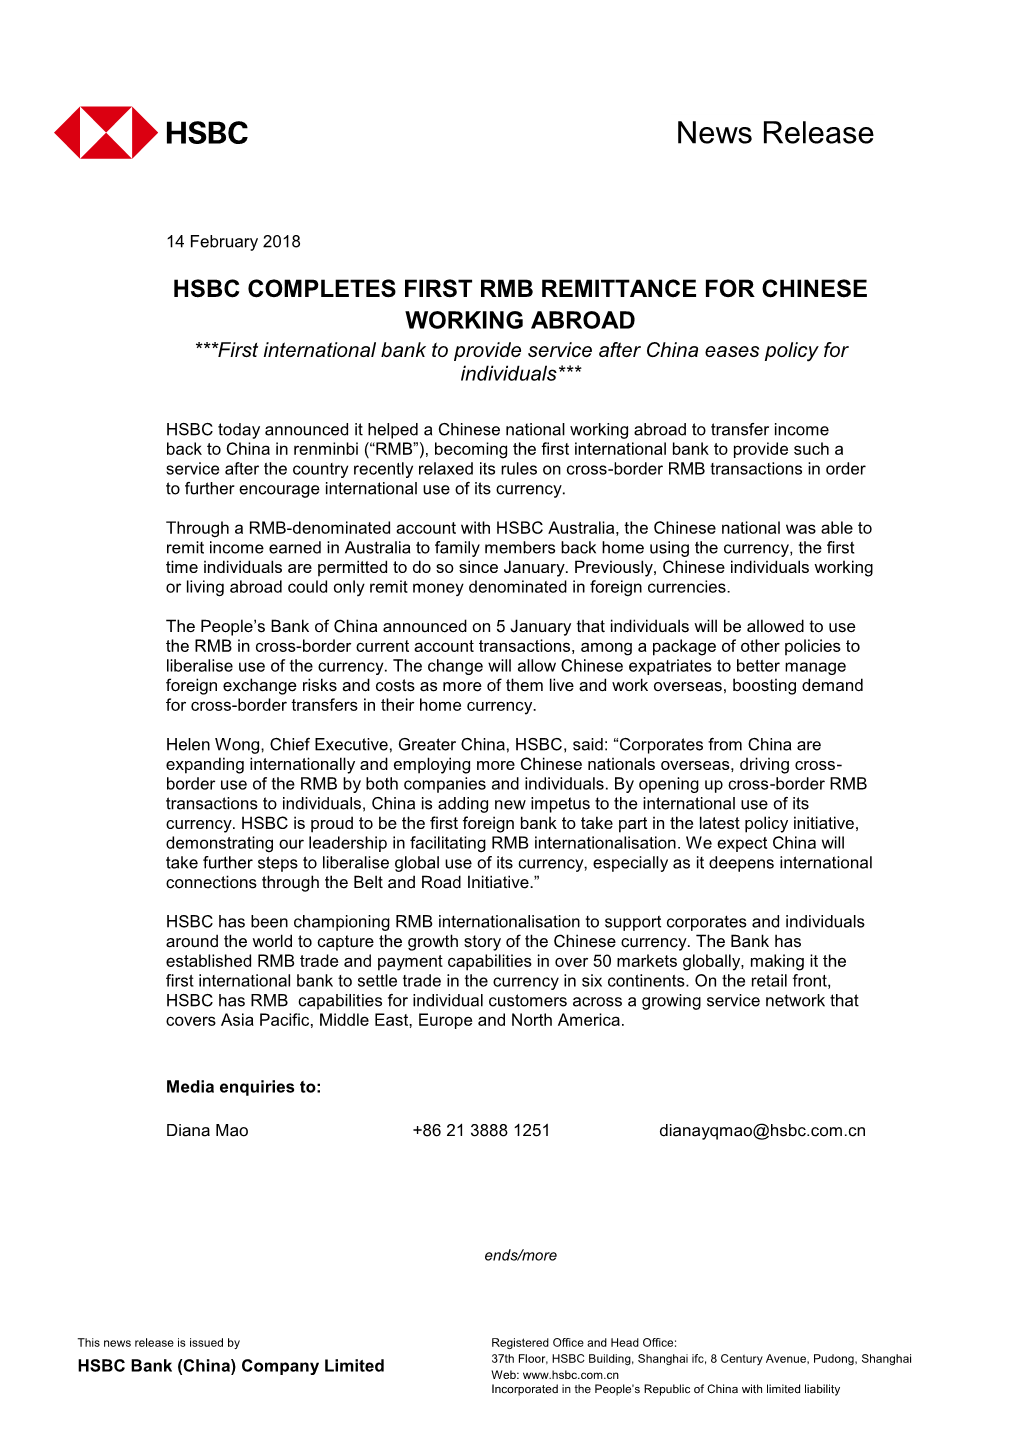 HSBC COMPLETES FIRST RMB REMITTANCE for CHINESE WORKING ABROAD ***First International Bank to Provide Service After China Eases Policy for Individuals***